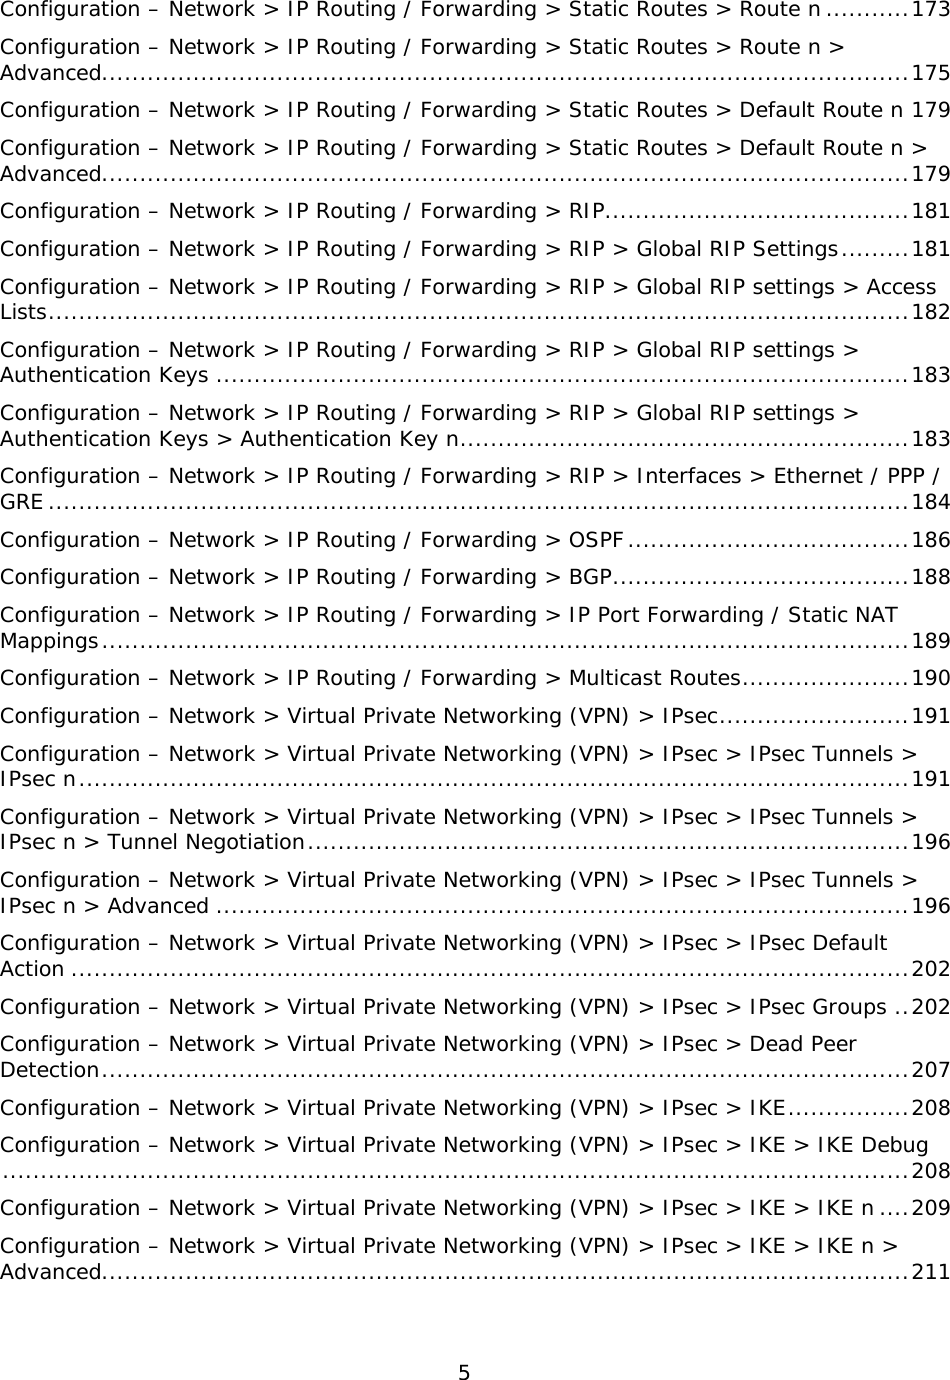 5  Configuration – Network &gt; IP Routing / Forwarding &gt; Static Routes &gt; Route n ........... 173 Configuration – Network &gt; IP Routing / Forwarding &gt; Static Routes &gt; Route n &gt; Advanced .......................................................................................................... 175 Configuration – Network &gt; IP Routing / Forwarding &gt; Static Routes &gt; Default Route n 179 Configuration – Network &gt; IP Routing / Forwarding &gt; Static Routes &gt; Default Route n &gt; Advanced .......................................................................................................... 179 Configuration – Network &gt; IP Routing / Forwarding &gt; RIP........................................ 181 Configuration – Network &gt; IP Routing / Forwarding &gt; RIP &gt; Global RIP Settings ......... 181 Configuration – Network &gt; IP Routing / Forwarding &gt; RIP &gt; Global RIP settings &gt; Access Lists ................................................................................................................. 182 Configuration – Network &gt; IP Routing / Forwarding &gt; RIP &gt; Global RIP settings &gt; Authentication Keys ........................................................................................... 183 Configuration – Network &gt; IP Routing / Forwarding &gt; RIP &gt; Global RIP settings &gt; Authentication Keys &gt; Authentication Key n ........................................................... 183 Configuration – Network &gt; IP Routing / Forwarding &gt; RIP &gt; Interfaces &gt; Ethernet / PPP / GRE ................................................................................................................. 184 Configuration – Network &gt; IP Routing / Forwarding &gt; OSPF ..................................... 186 Configuration – Network &gt; IP Routing / Forwarding &gt; BGP ....................................... 188 Configuration – Network &gt; IP Routing / Forwarding &gt; IP Port Forwarding / Static NAT Mappings .......................................................................................................... 189 Configuration – Network &gt; IP Routing / Forwarding &gt; Multicast Routes ...................... 190 Configuration – Network &gt; Virtual Private Networking (VPN) &gt; IPsec ......................... 191 Configuration – Network &gt; Virtual Private Networking (VPN) &gt; IPsec &gt; IPsec Tunnels &gt; IPsec n ............................................................................................................. 191 Configuration – Network &gt; Virtual Private Networking (VPN) &gt; IPsec &gt; IPsec Tunnels &gt; IPsec n &gt; Tunnel Negotiation ............................................................................... 196 Configuration – Network &gt; Virtual Private Networking (VPN) &gt; IPsec &gt; IPsec Tunnels &gt; IPsec n &gt; Advanced ........................................................................................... 196 Configuration – Network &gt; Virtual Private Networking (VPN) &gt; IPsec &gt; IPsec Default Action .............................................................................................................. 202 Configuration – Network &gt; Virtual Private Networking (VPN) &gt; IPsec &gt; IPsec Groups .. 202 Configuration – Network &gt; Virtual Private Networking (VPN) &gt; IPsec &gt; Dead Peer Detection .......................................................................................................... 207 Configuration – Network &gt; Virtual Private Networking (VPN) &gt; IPsec &gt; IKE ................ 208 Configuration – Network &gt; Virtual Private Networking (VPN) &gt; IPsec &gt; IKE &gt; IKE Debug ....................................................................................................................... 208 Configuration – Network &gt; Virtual Private Networking (VPN) &gt; IPsec &gt; IKE &gt; IKE n .... 209 Configuration – Network &gt; Virtual Private Networking (VPN) &gt; IPsec &gt; IKE &gt; IKE n &gt; Advanced .......................................................................................................... 211 